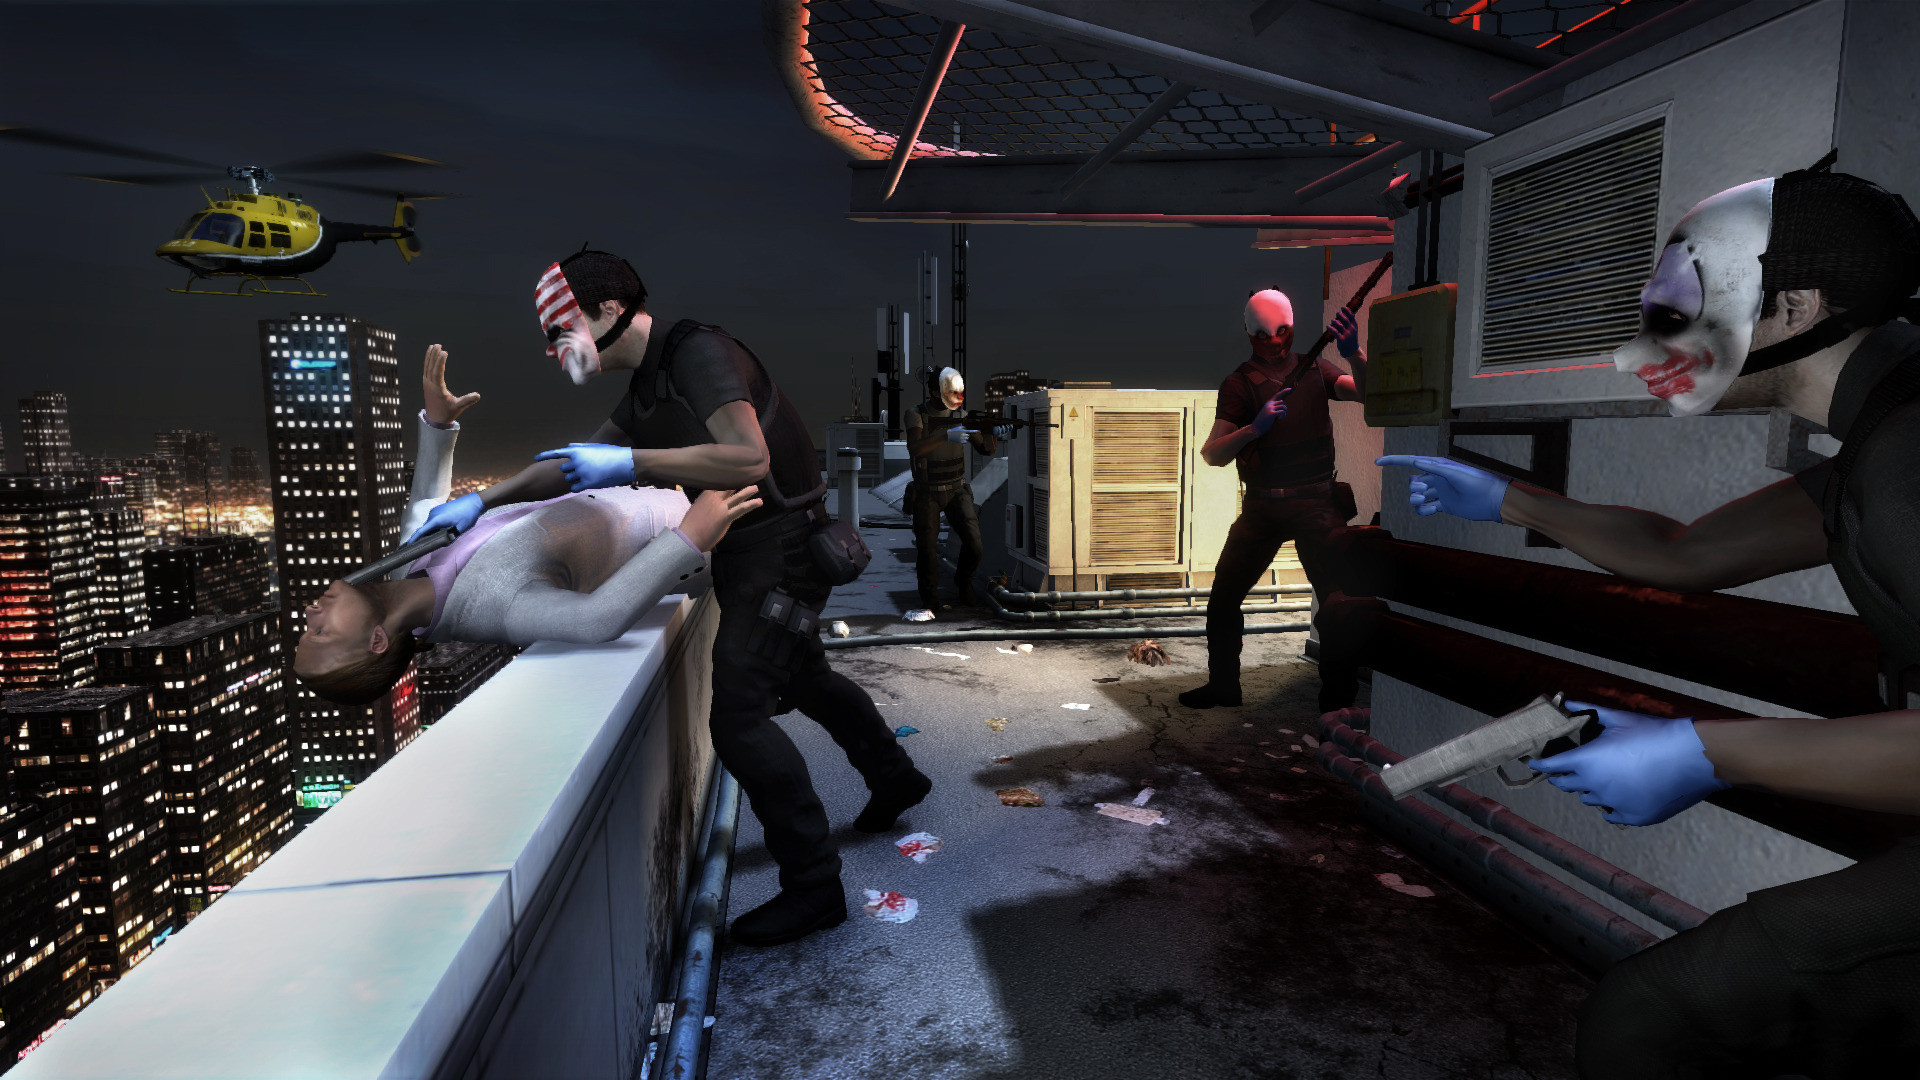 1920x1080 Free game alert: Steal a no-cost copy of Payday: The Heist for today only |  PCWorld